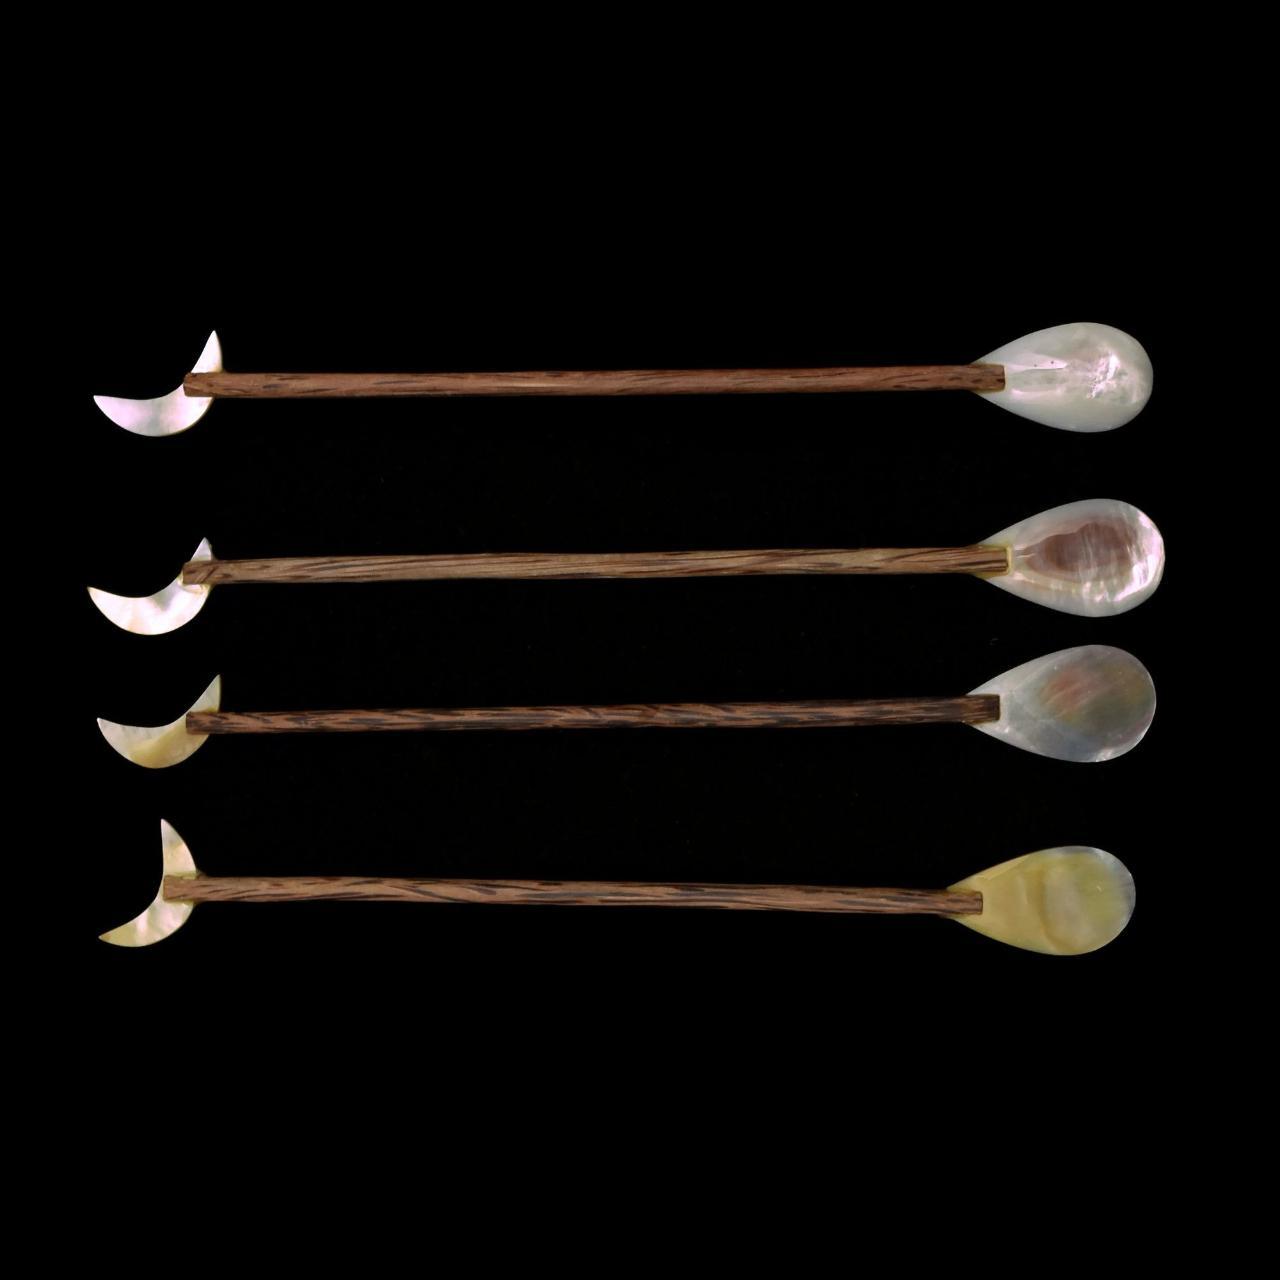 This is a set of 4 spoons., Handmade in Bali., Great